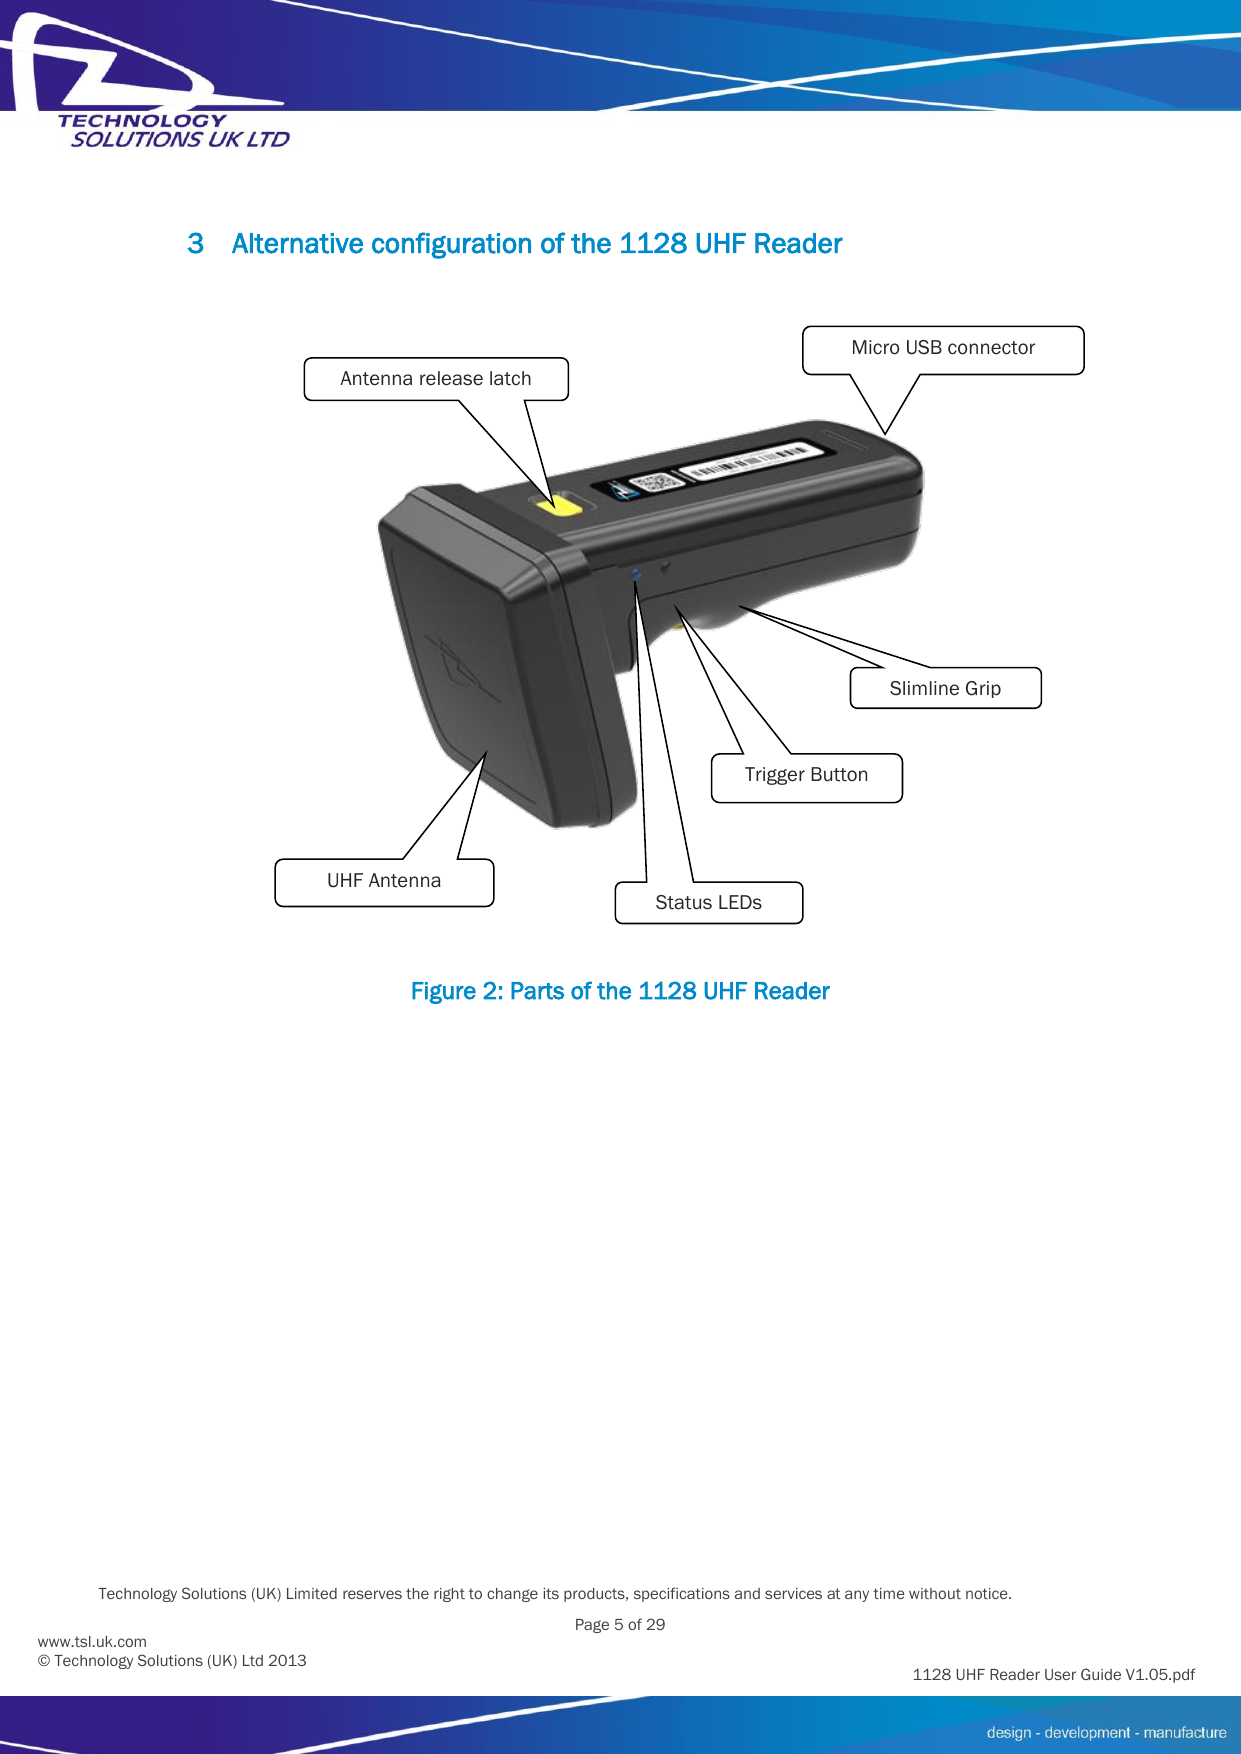          Technology Solutions (UK) Limited reserves the right to change its products, specifications and services at any time without notice.   Page 5 of 29 1128 UHF Reader User Guide V1.05.pdf www.tsl.uk.com © Technology Solutions (UK) Ltd 2013  3 Alternative configuration of the 1128 UHF Reader  Figure 2: Parts of the 1128 UHF Reader Status LEDs Trigger Button Micro USB connector Antenna release latch UHF Antenna Slimline Grip 